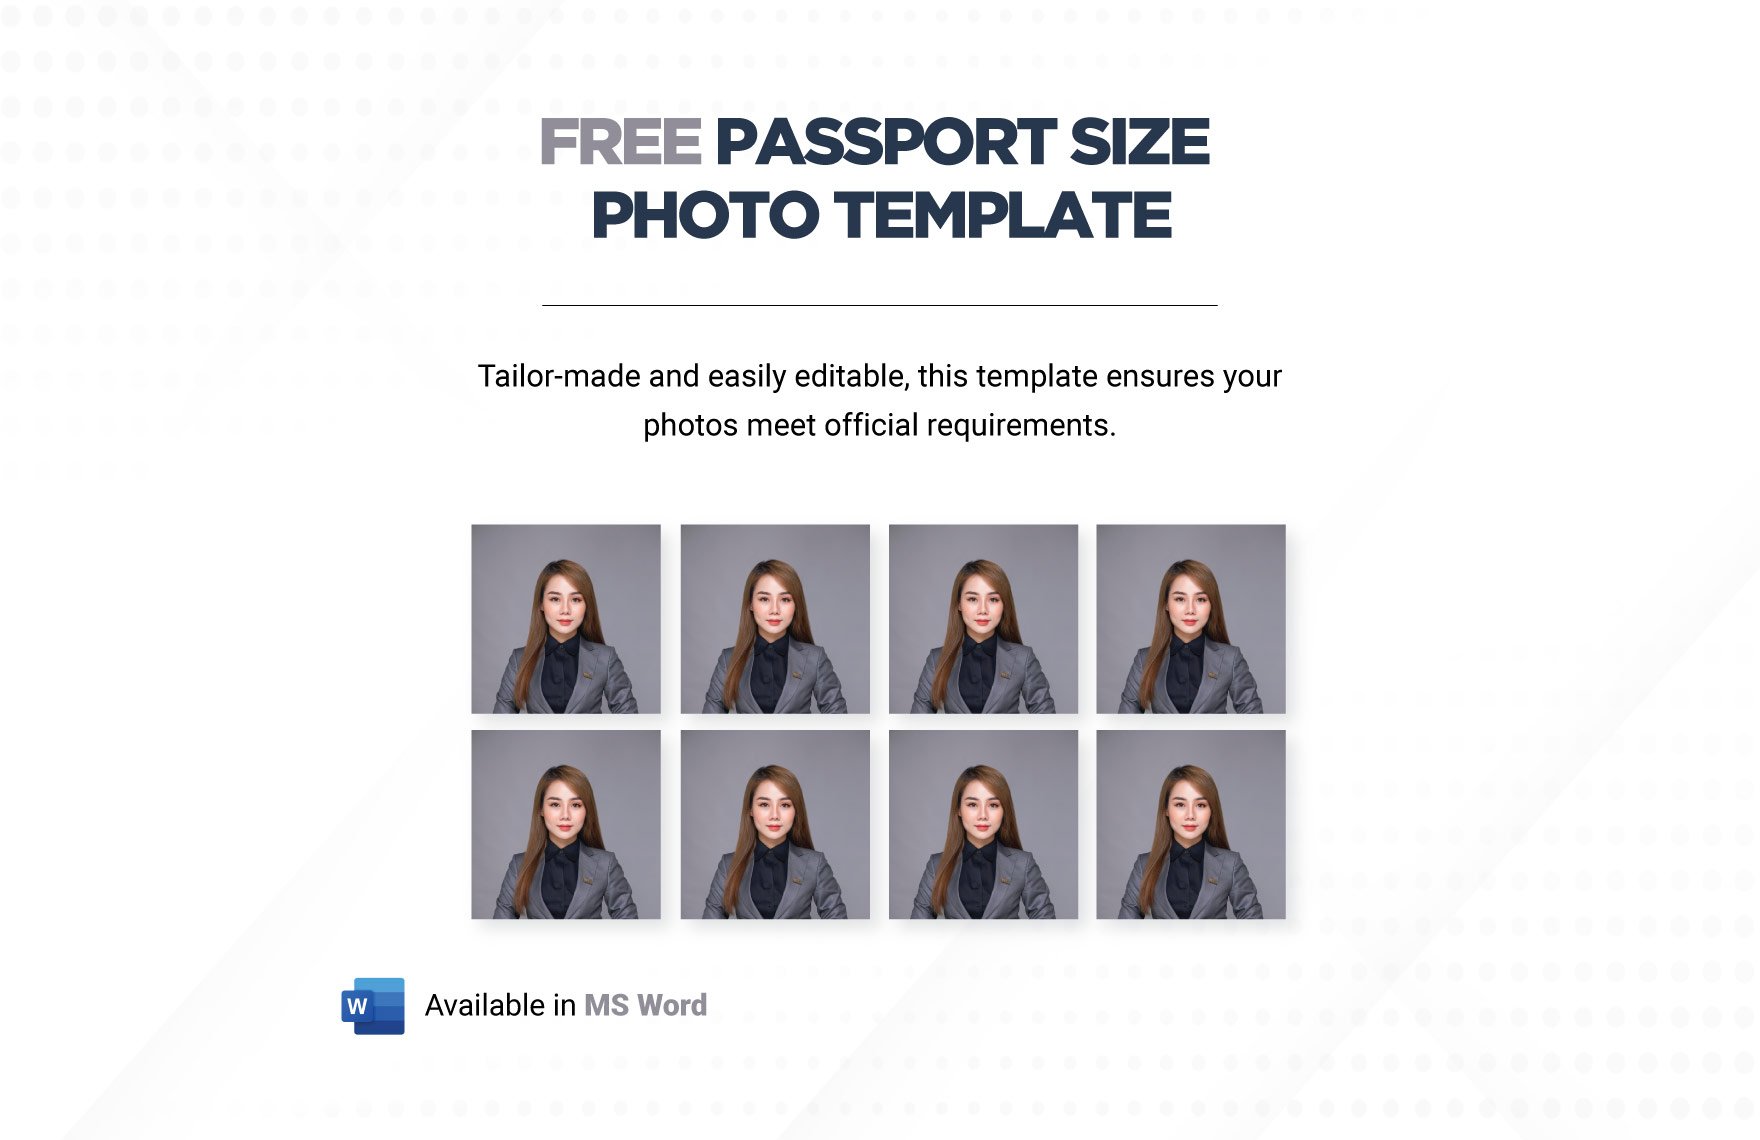 Passport Size Photo Template in Word